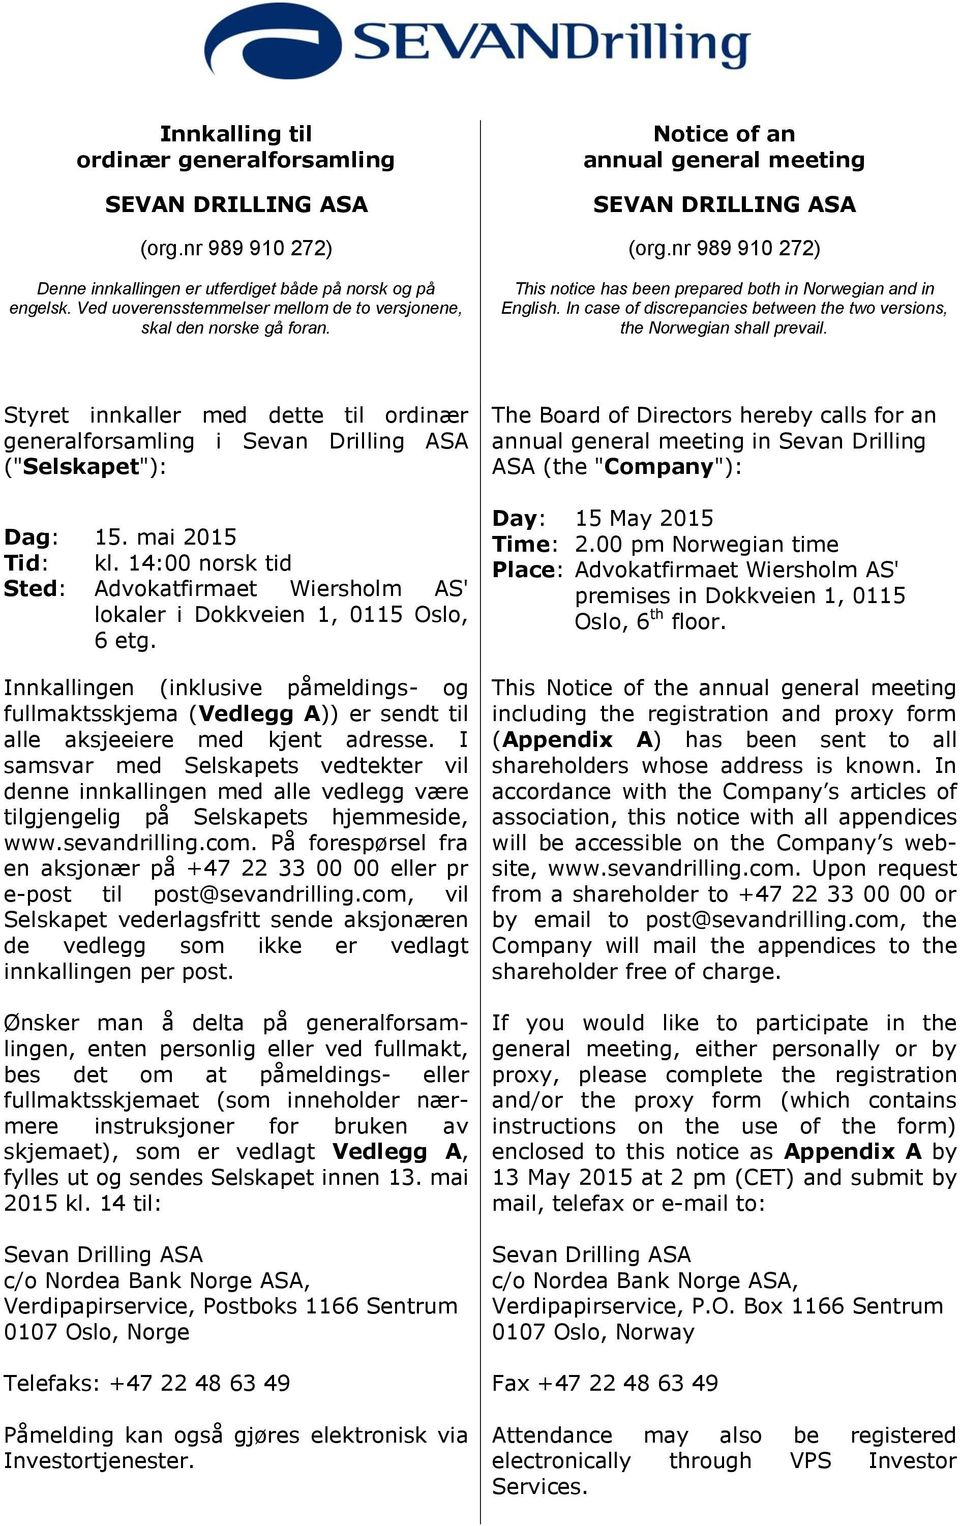 nr 989 910 272) This notice has been prepared both in Norwegian and in English. In case of discrepancies between the two versions, the Norwegian shall prevail.